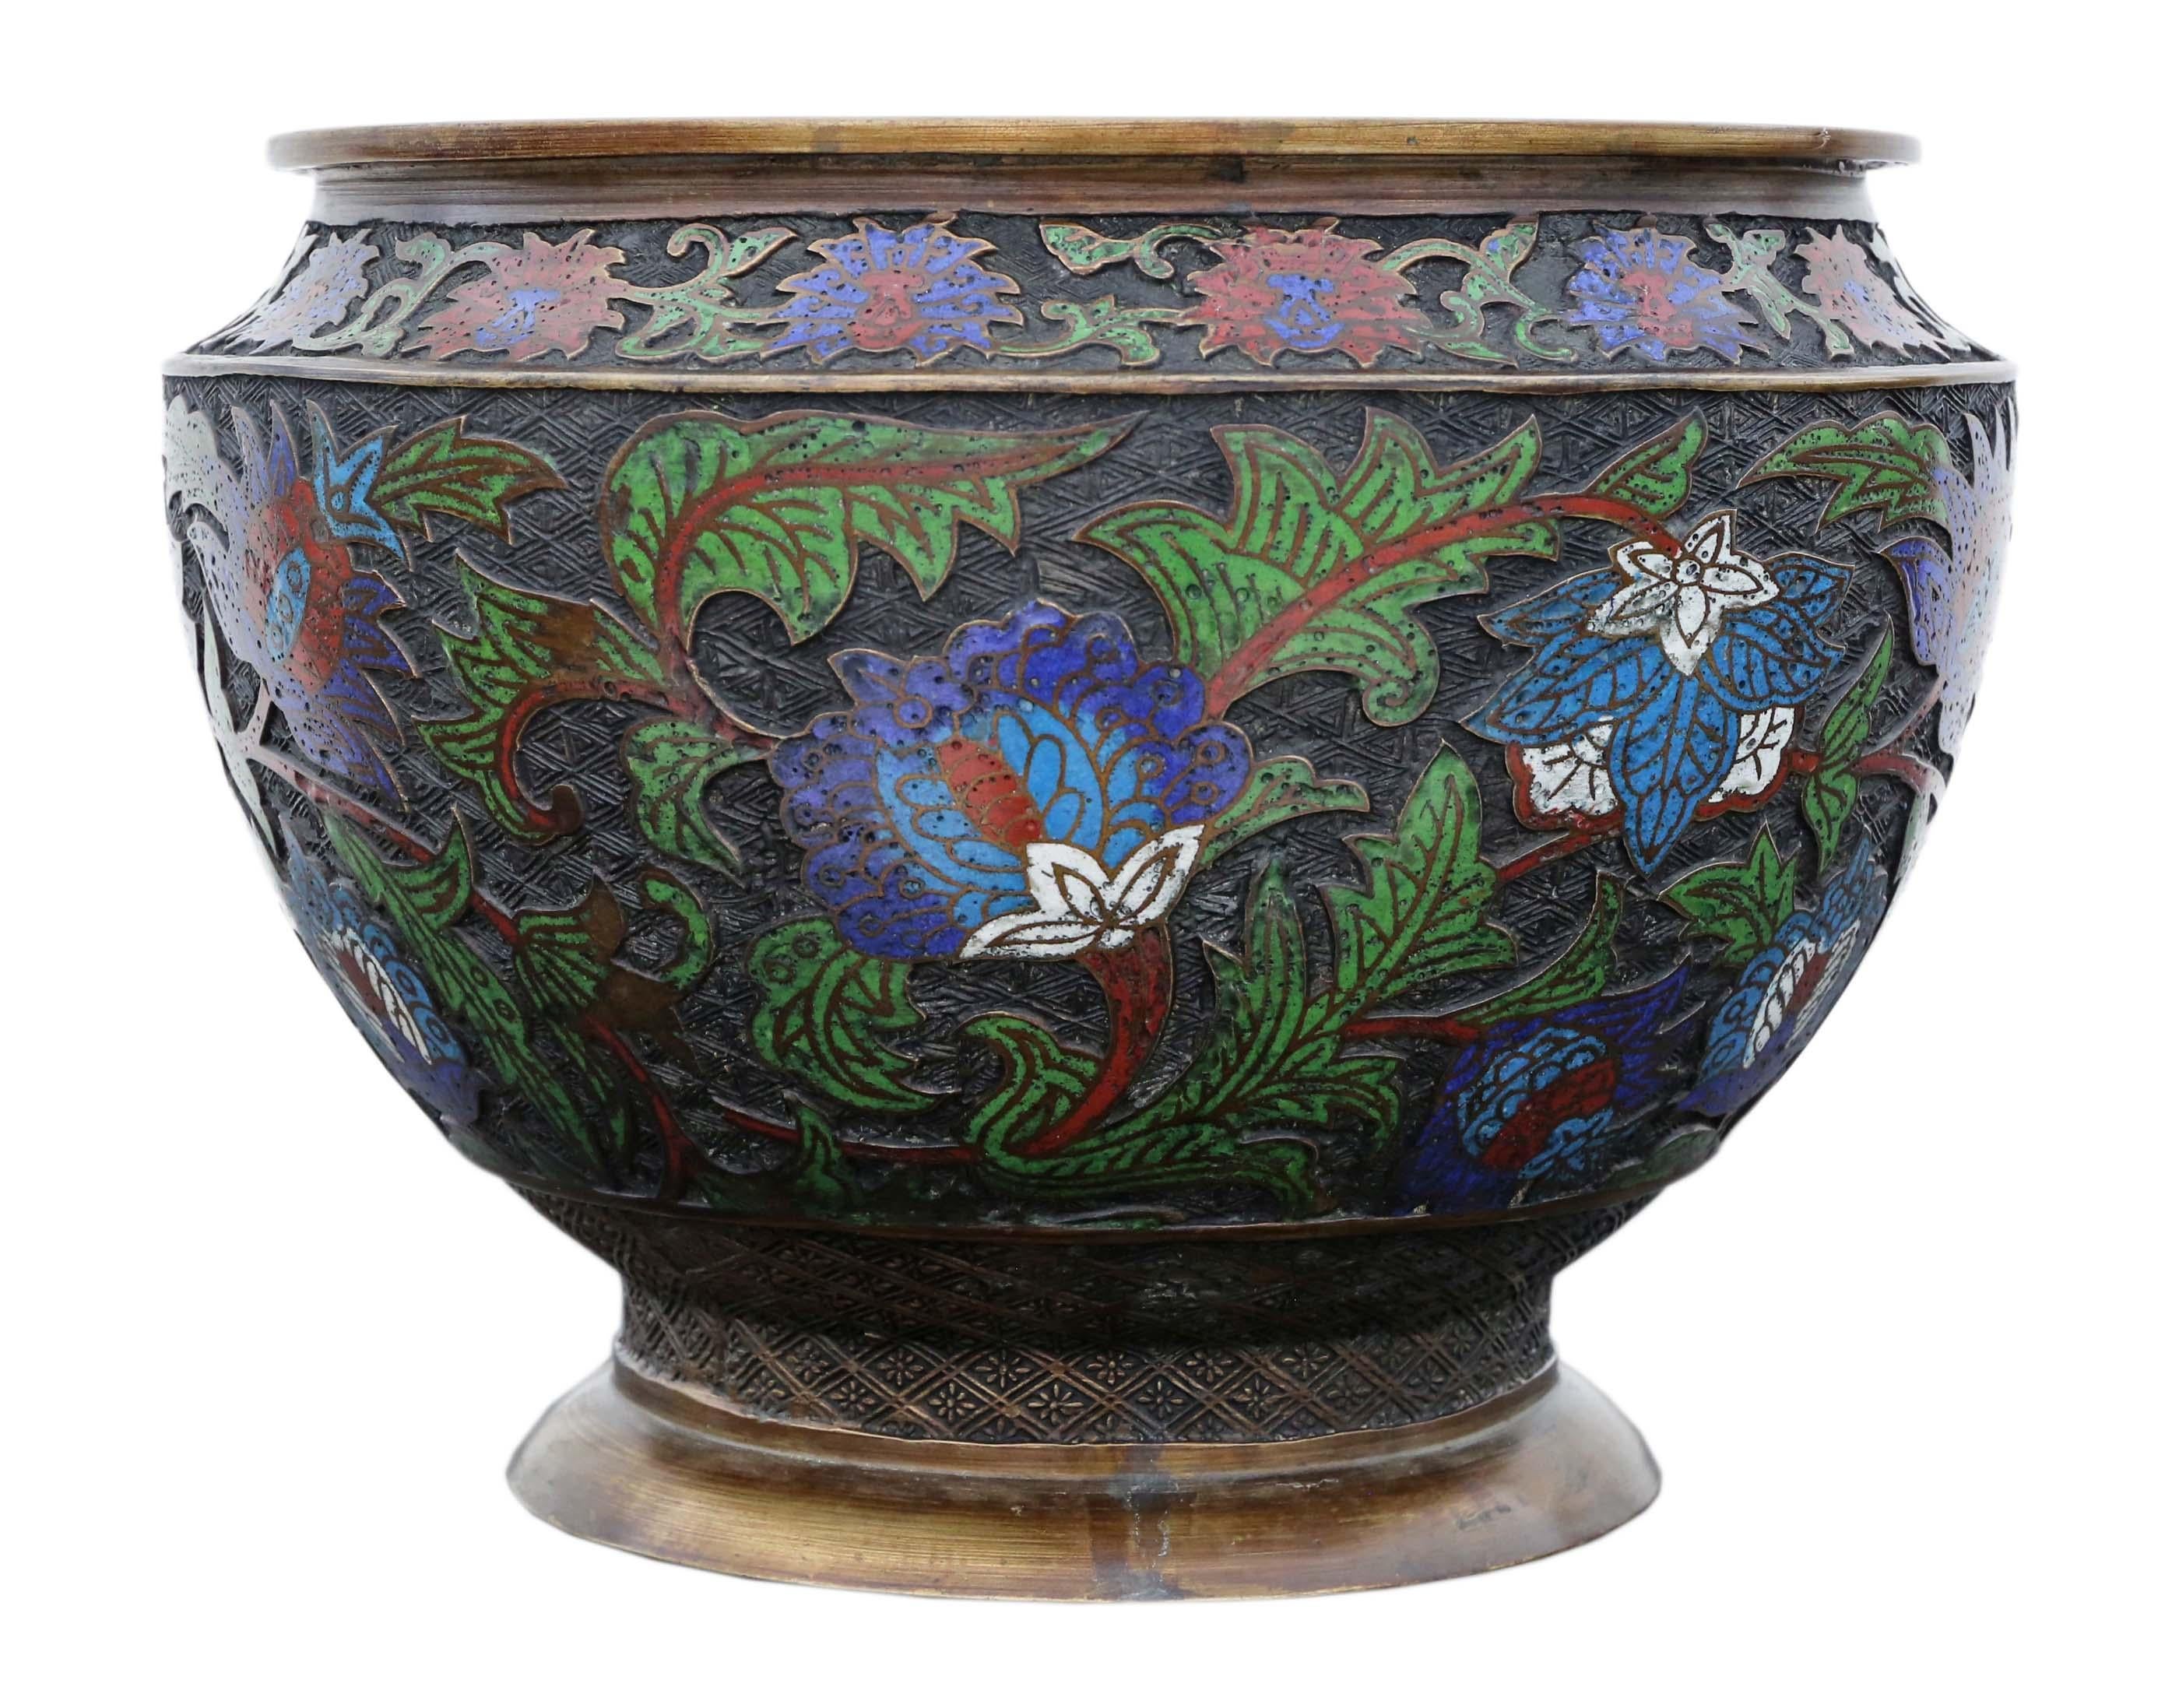 Antique large quality Oriental Japanese bronze champleve enamel Jardiniere planter bowl C1910 Meiji Period.

Would look amazing in the right location. Rare large size and design.

Overall maximum dimensions: 33cm diameter x 24cm high. 27cm